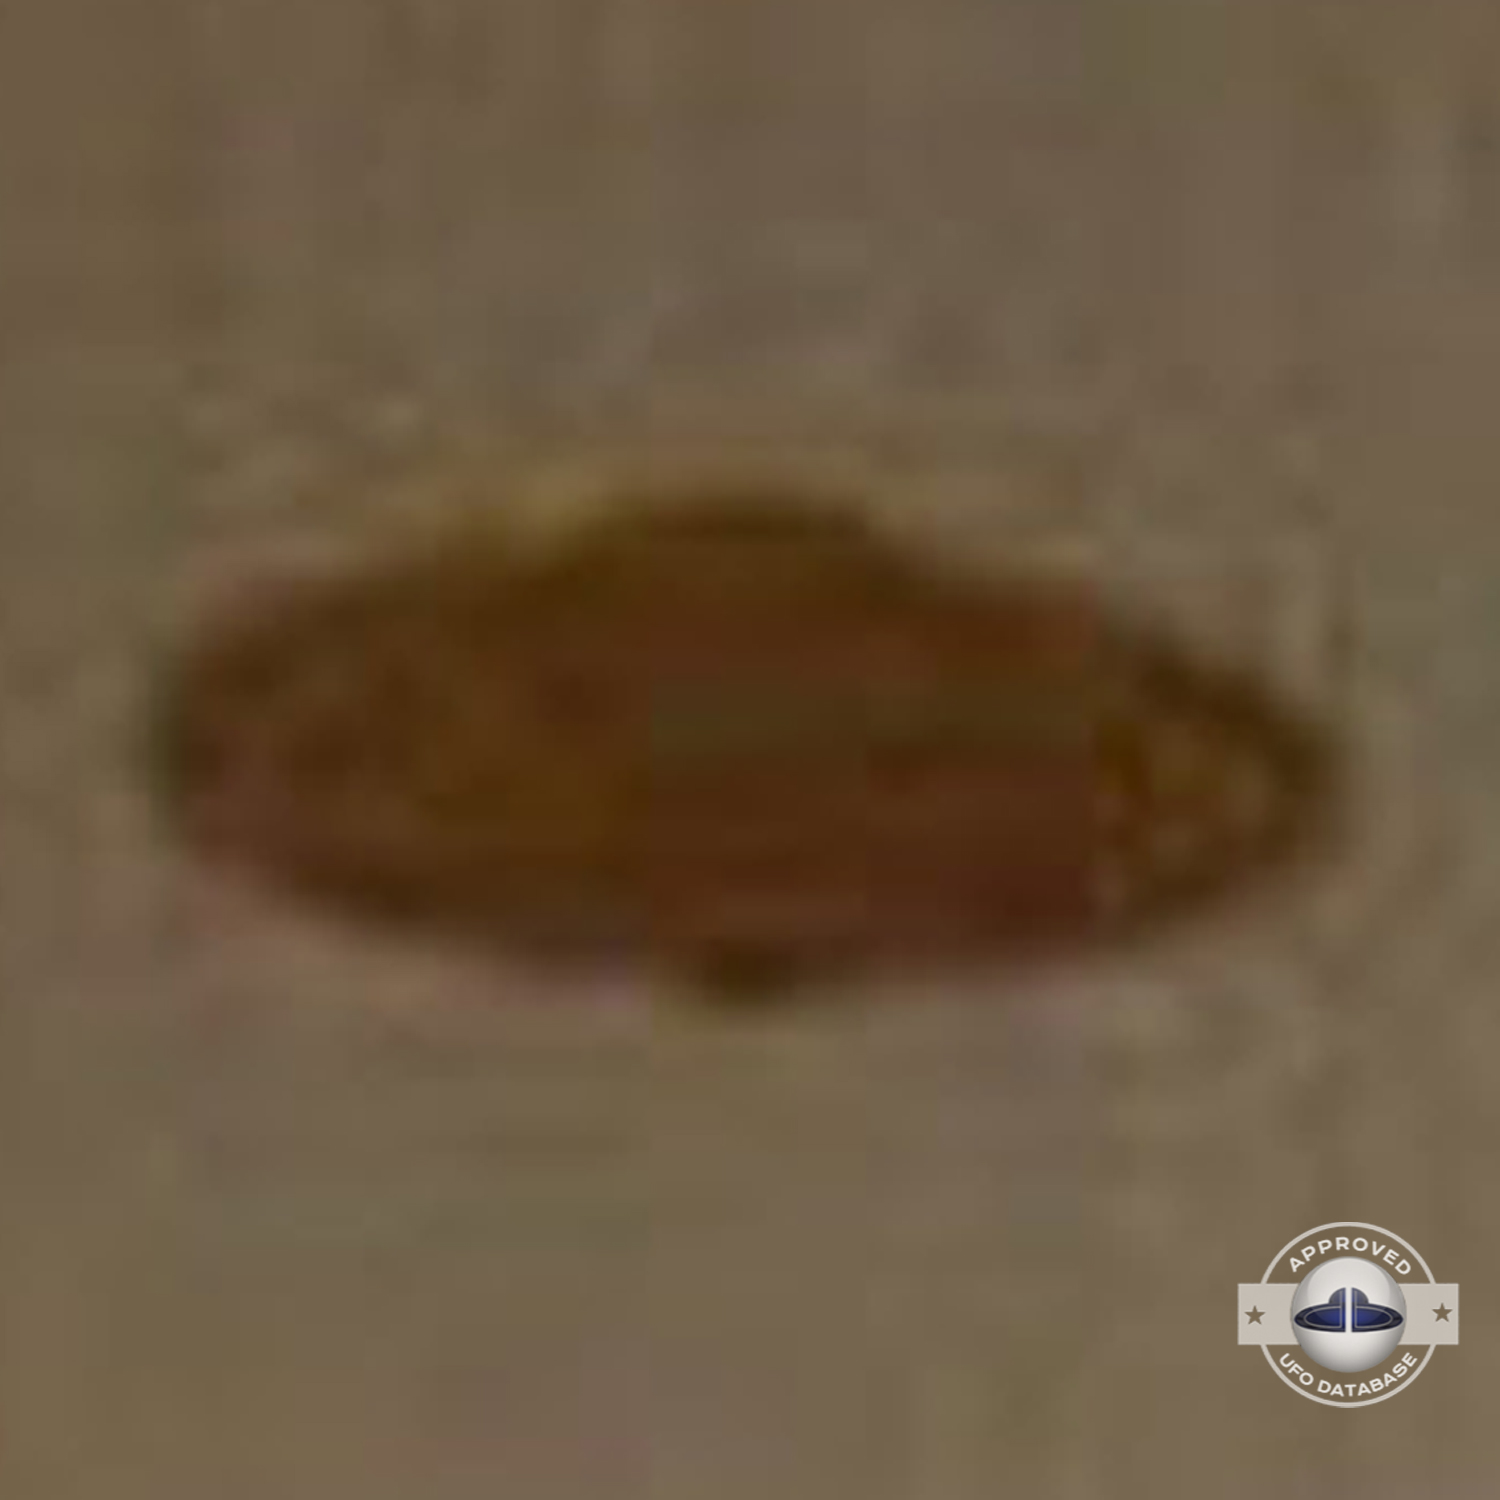 The UFO has a Saturn shape and can be seen at nightfall over a house UFO Picture #65-5